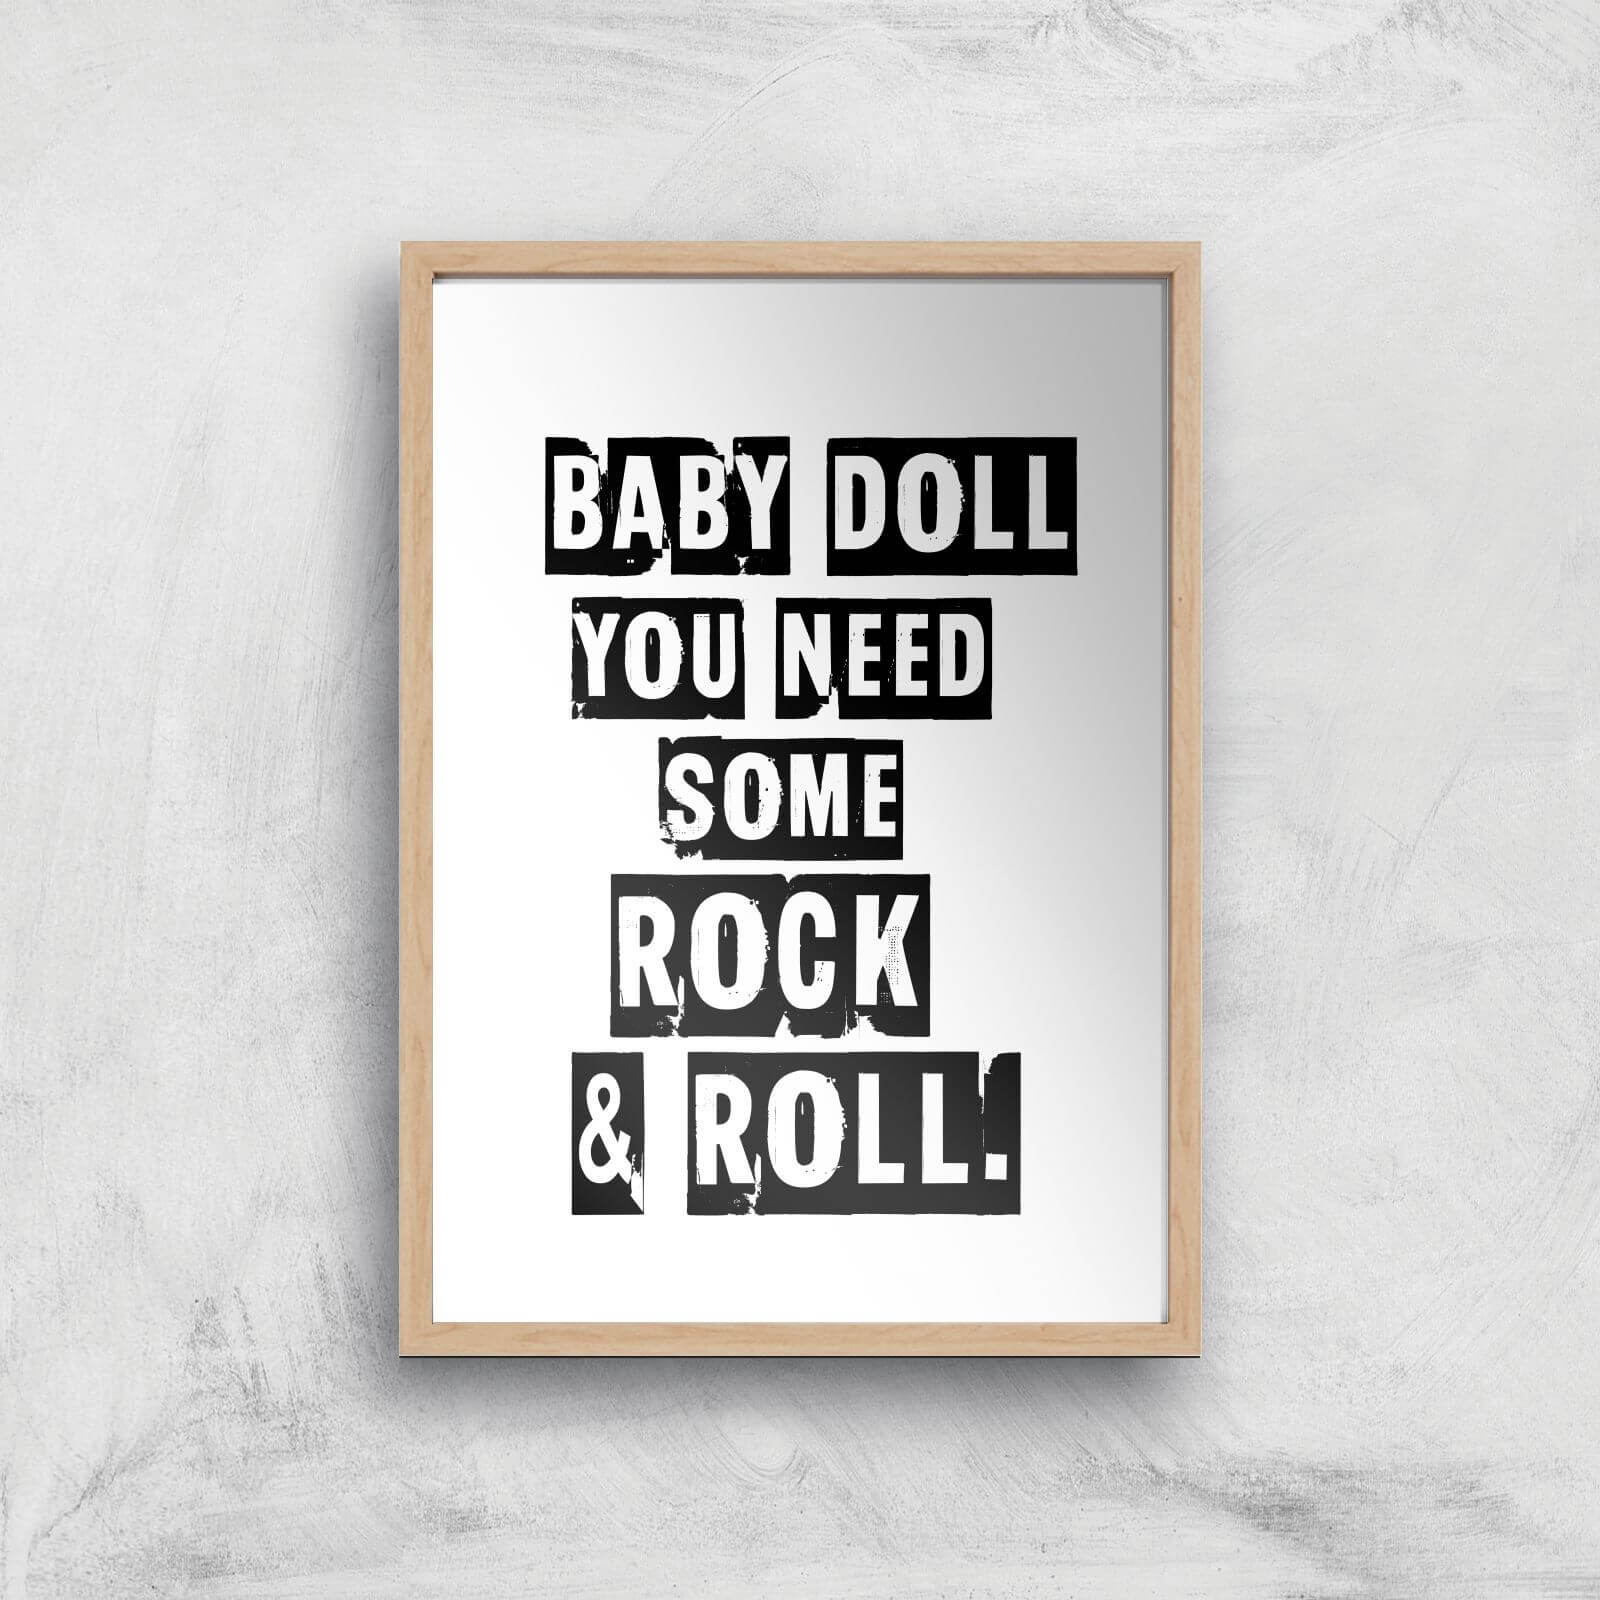 Baby Doll You Need Some Rock & Roll Giclee Art Print - A4 - Wooden Frame